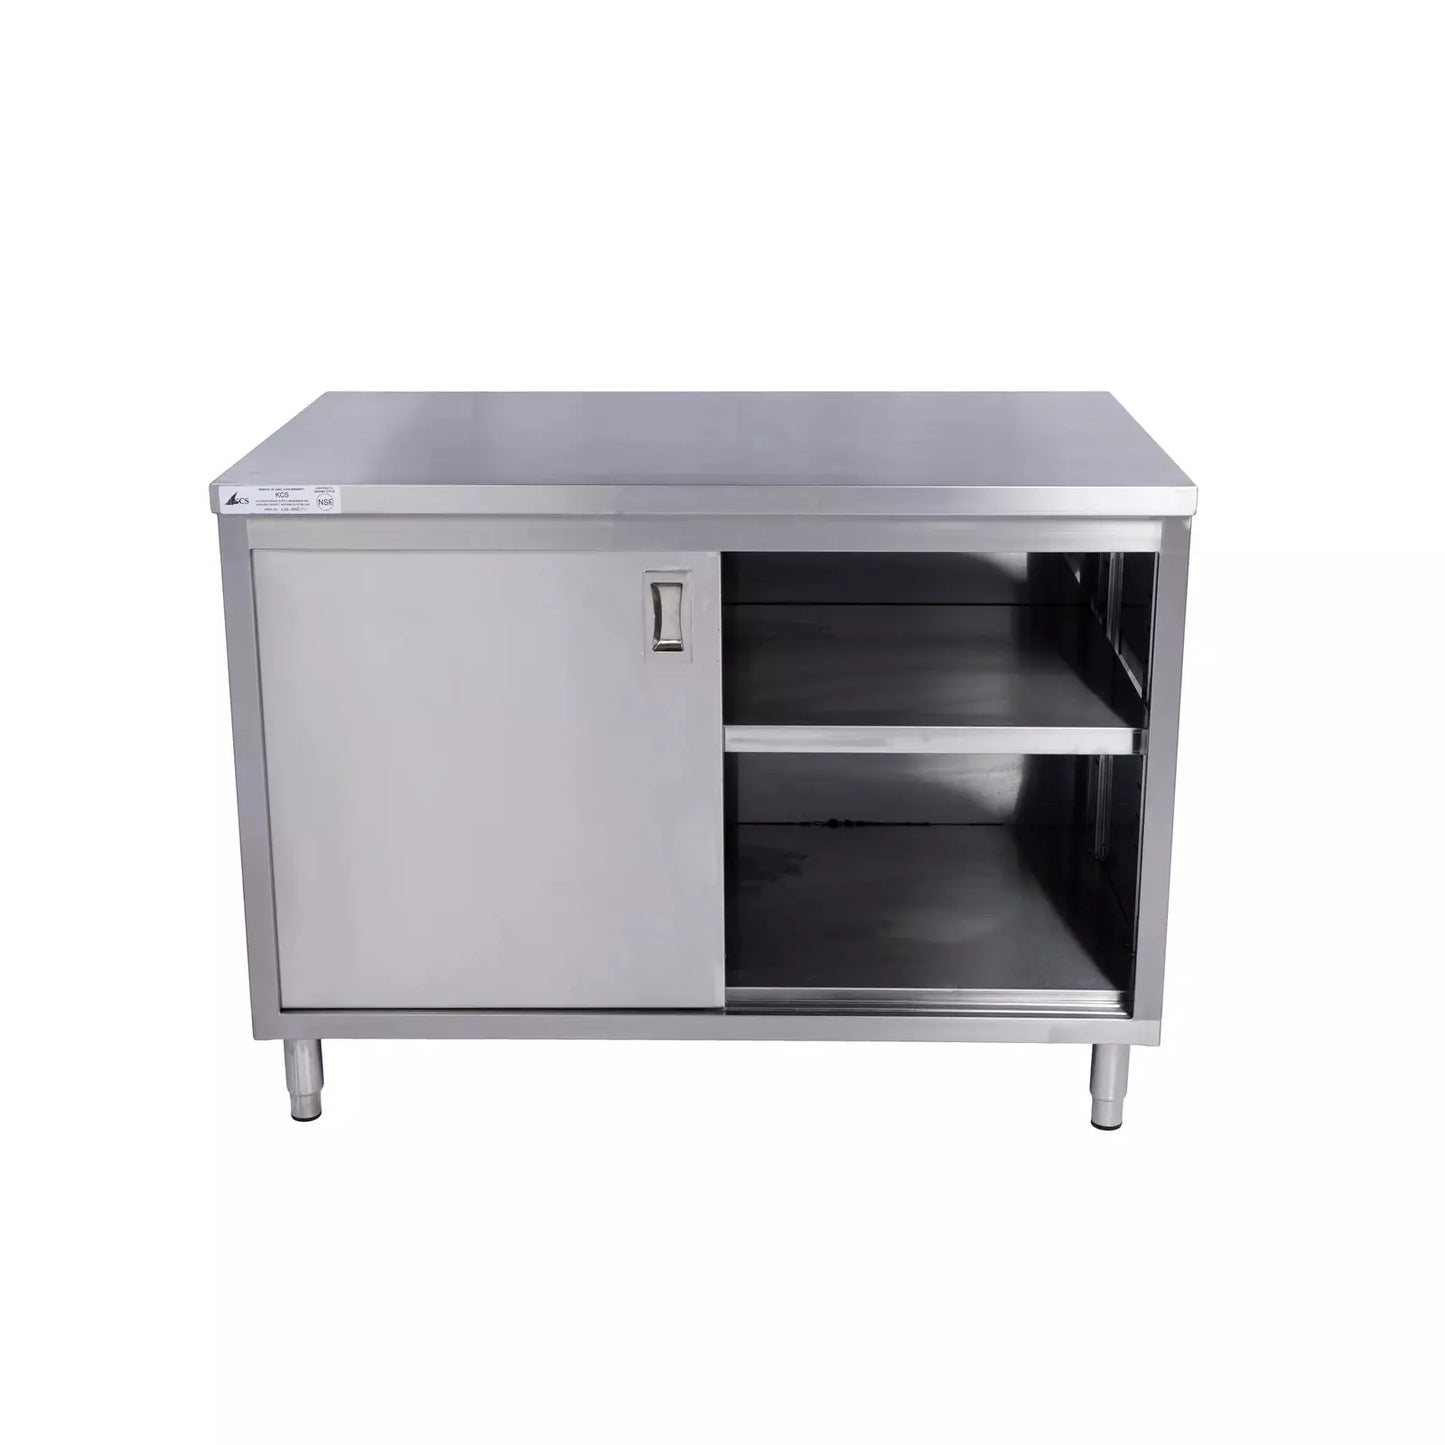 KCS CBS-2448 24" x 48" Stainless Steel Storage Welded Cabinet with 2 Sliding Doors